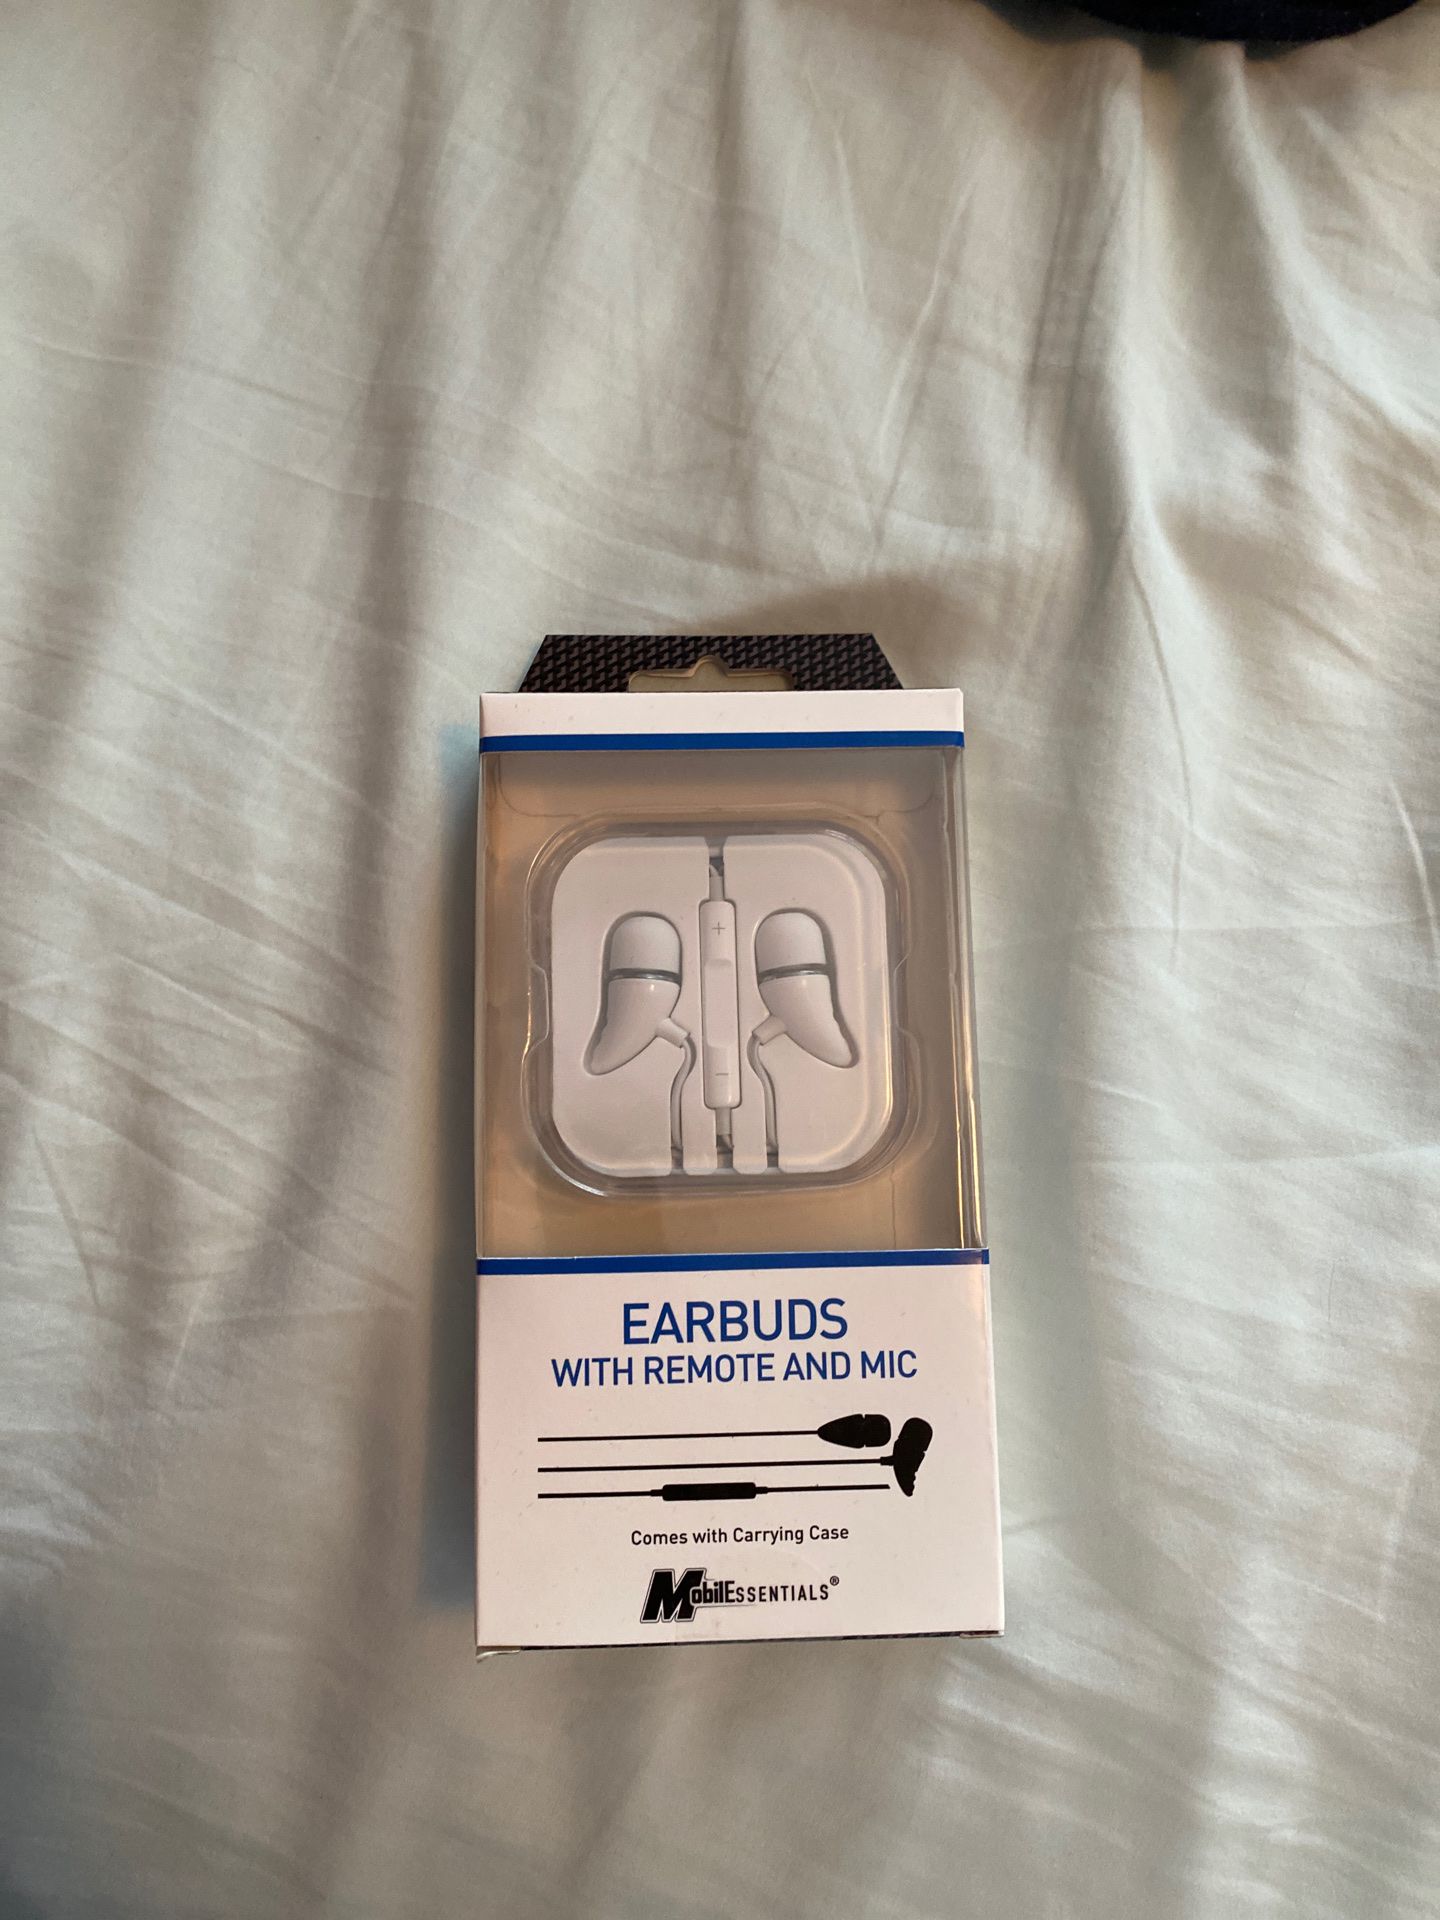 Brand new earbuds